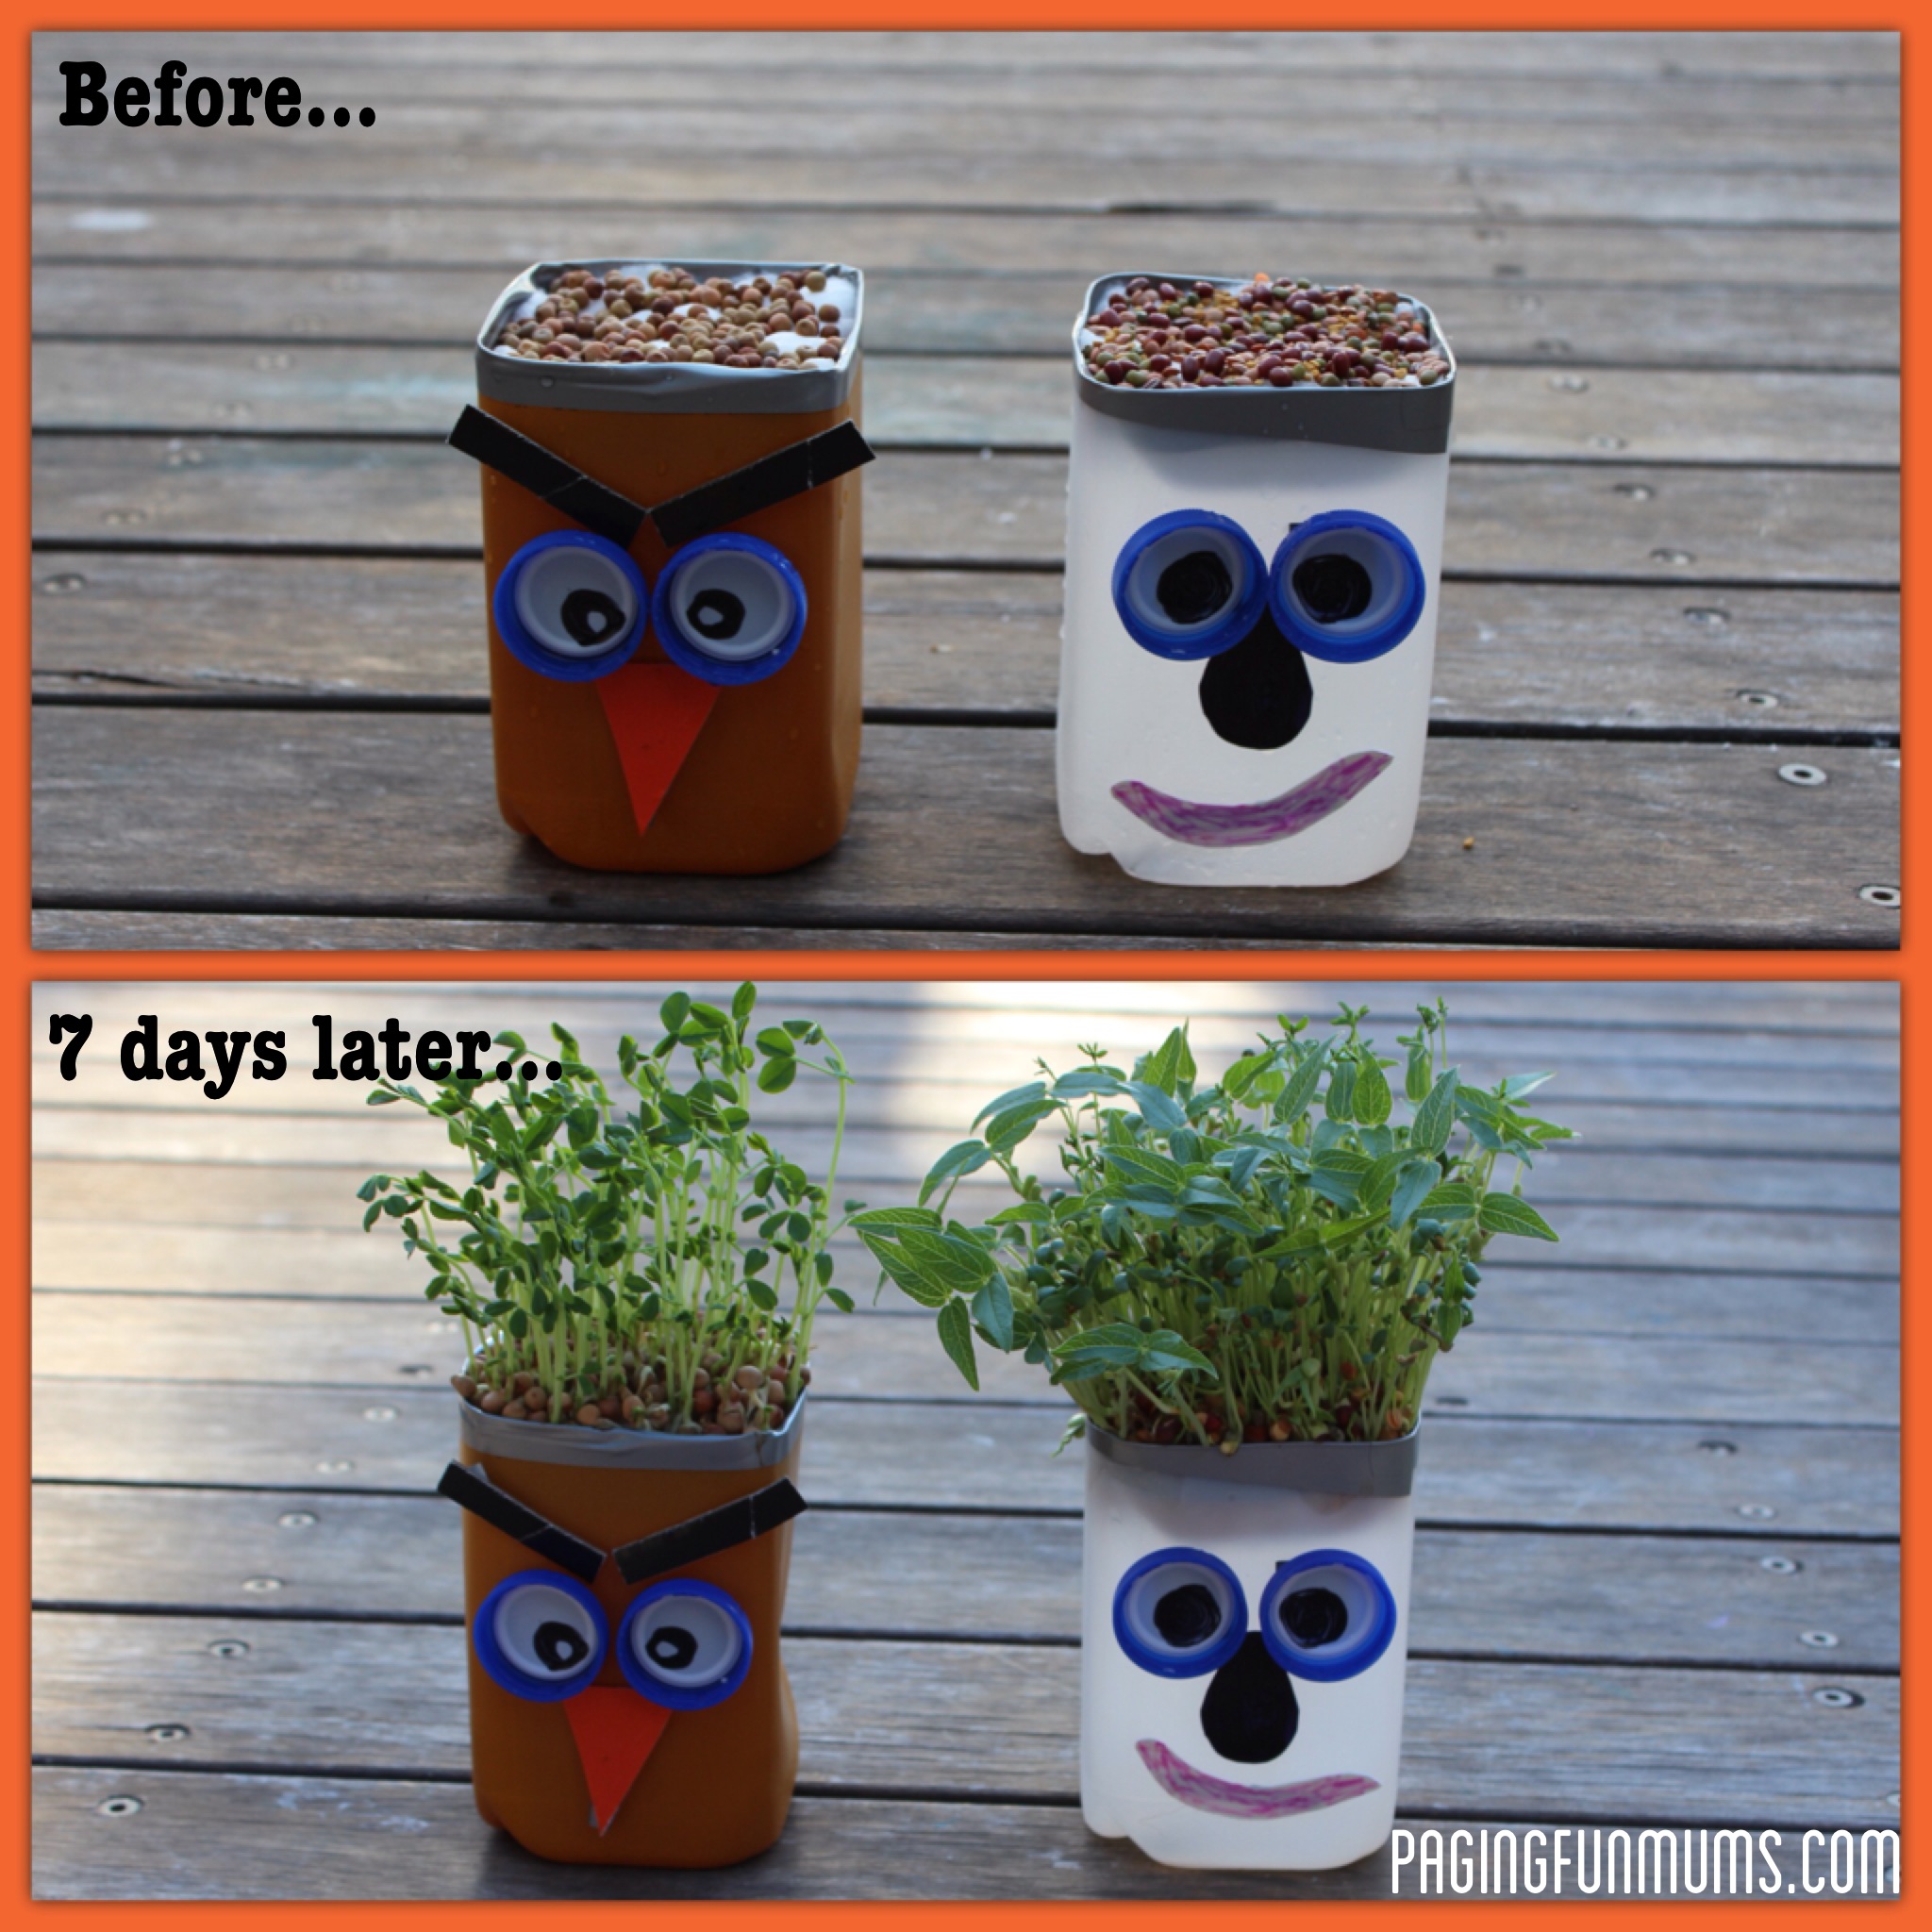 Spout Buddies - Using recycled Milk Jugs